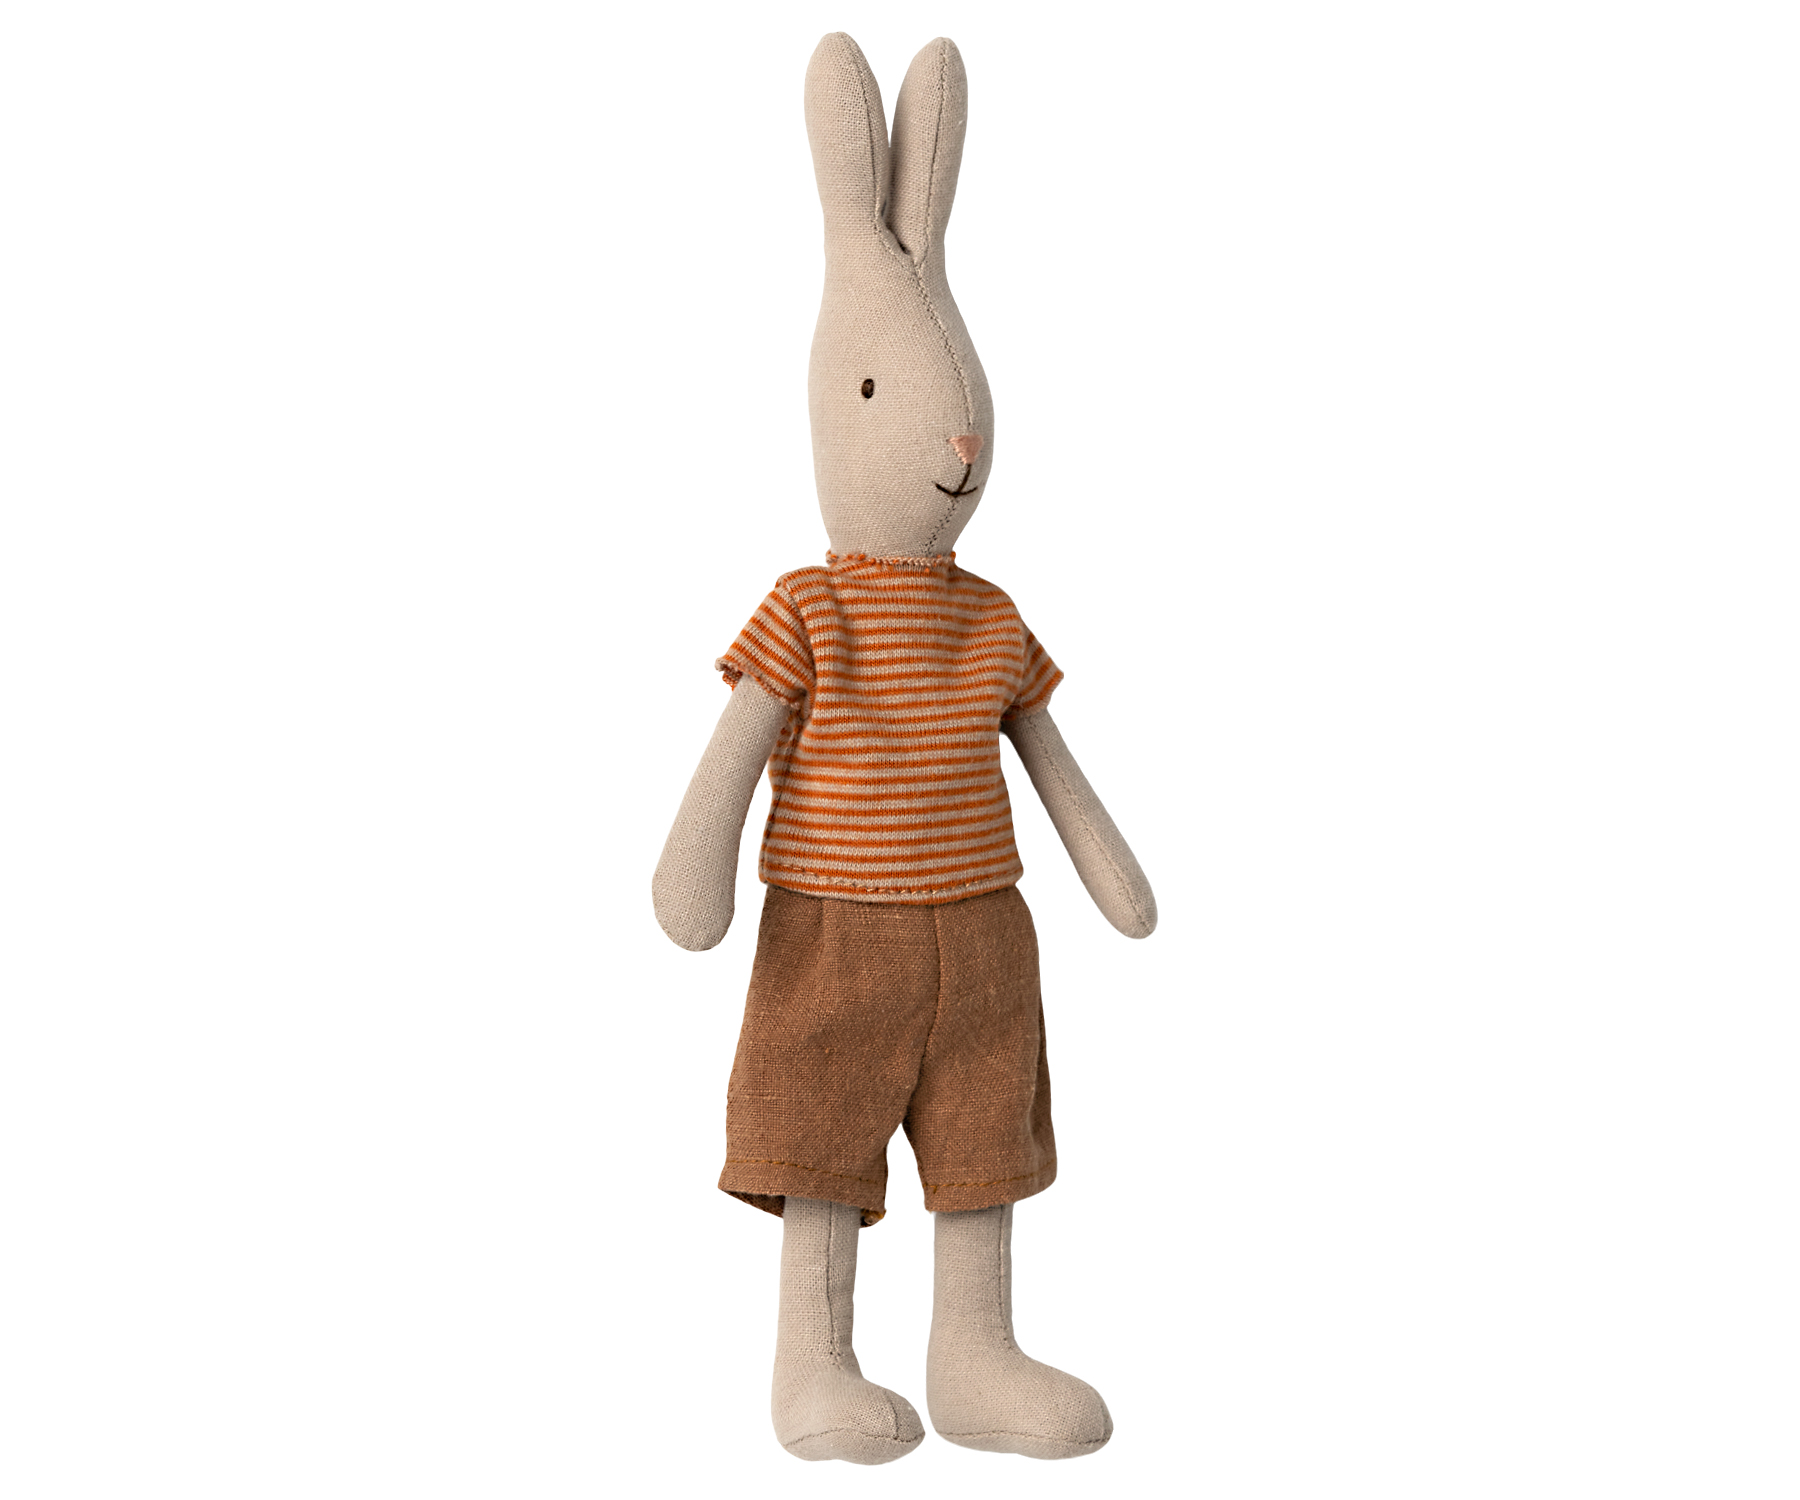 Rabbit size 4, Classic - Knitted shirt and shorts